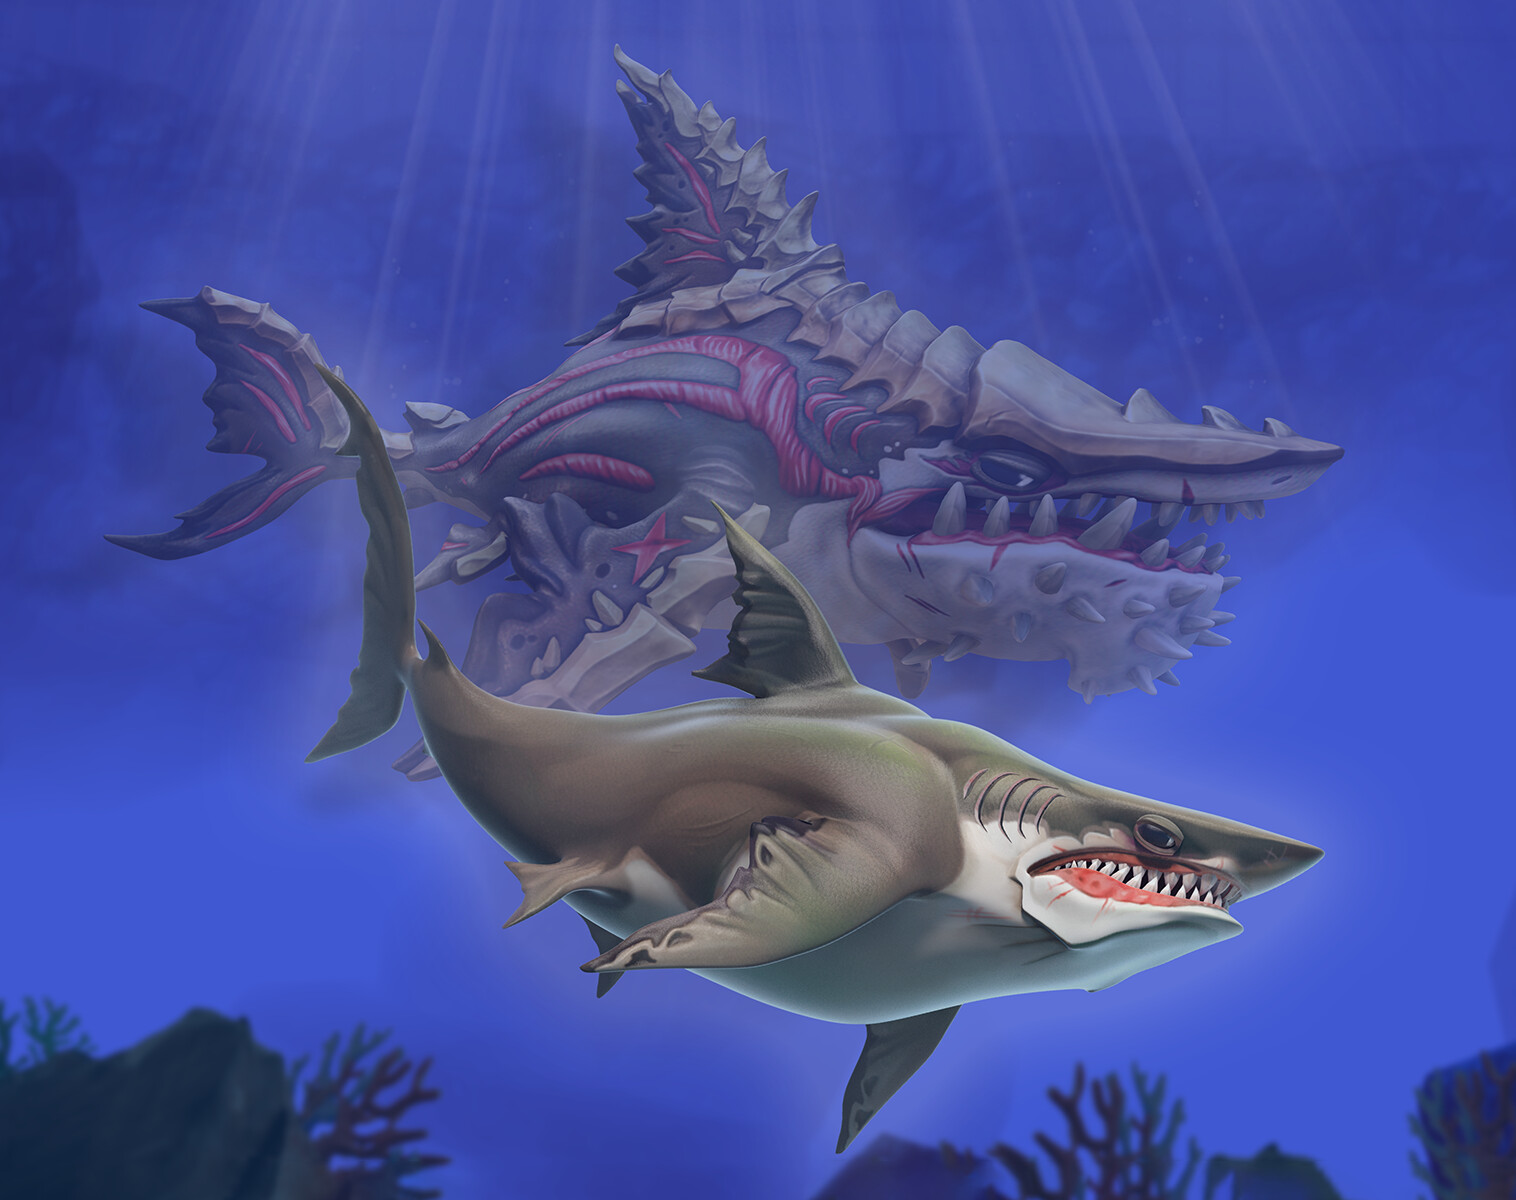 Hungry Shark - Megalodon keeps in the shadows, only coming